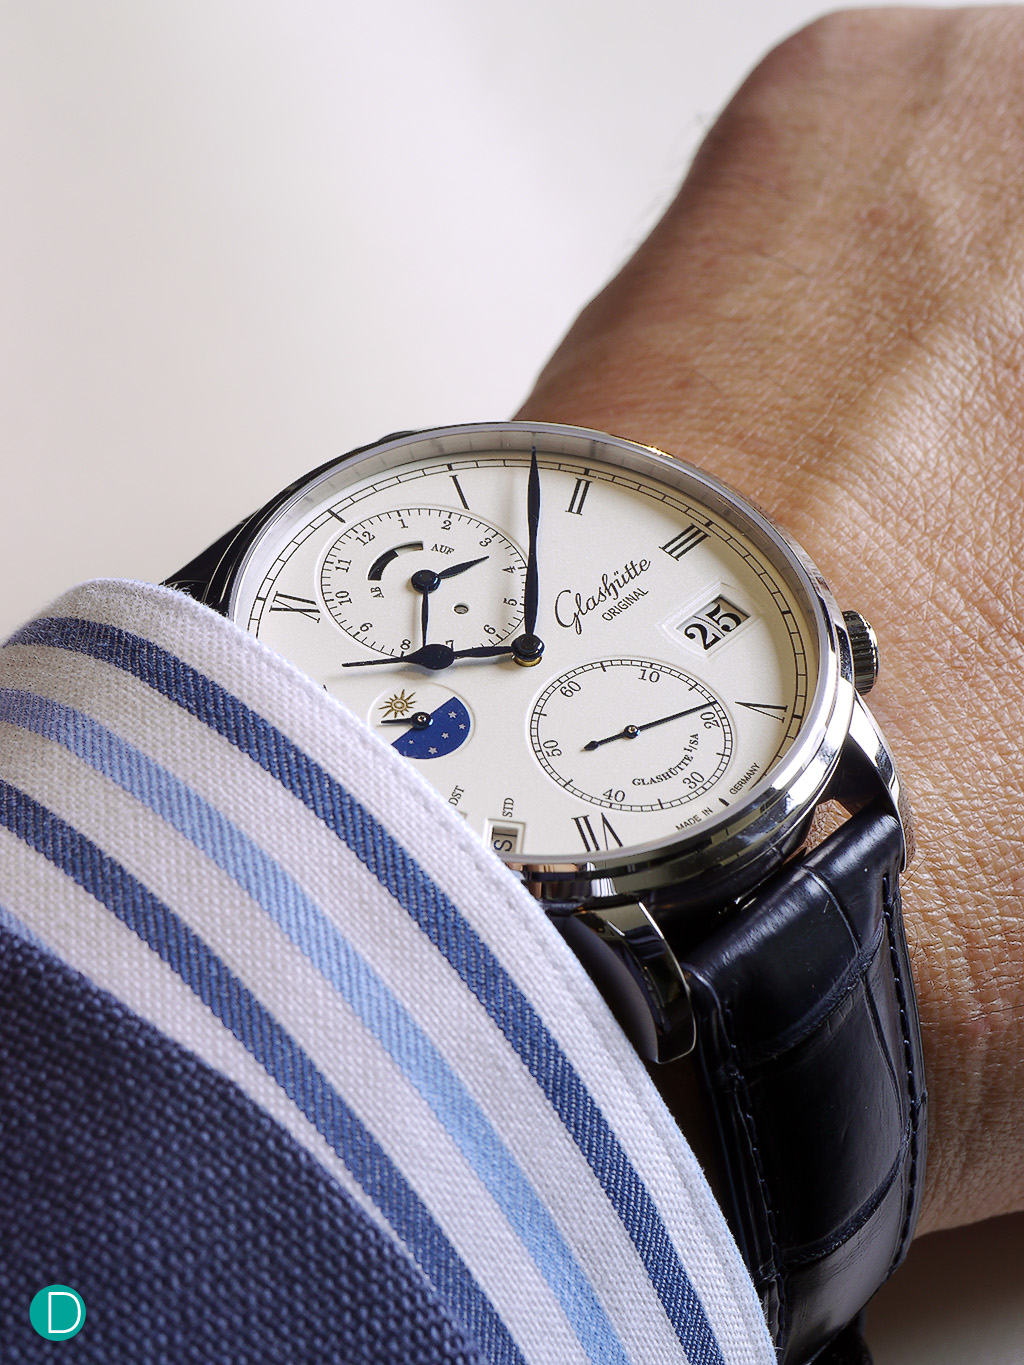 On the wrist, the 44mm case is perfect, and slips under the cuff easily and sits comfortably on the wrist. 